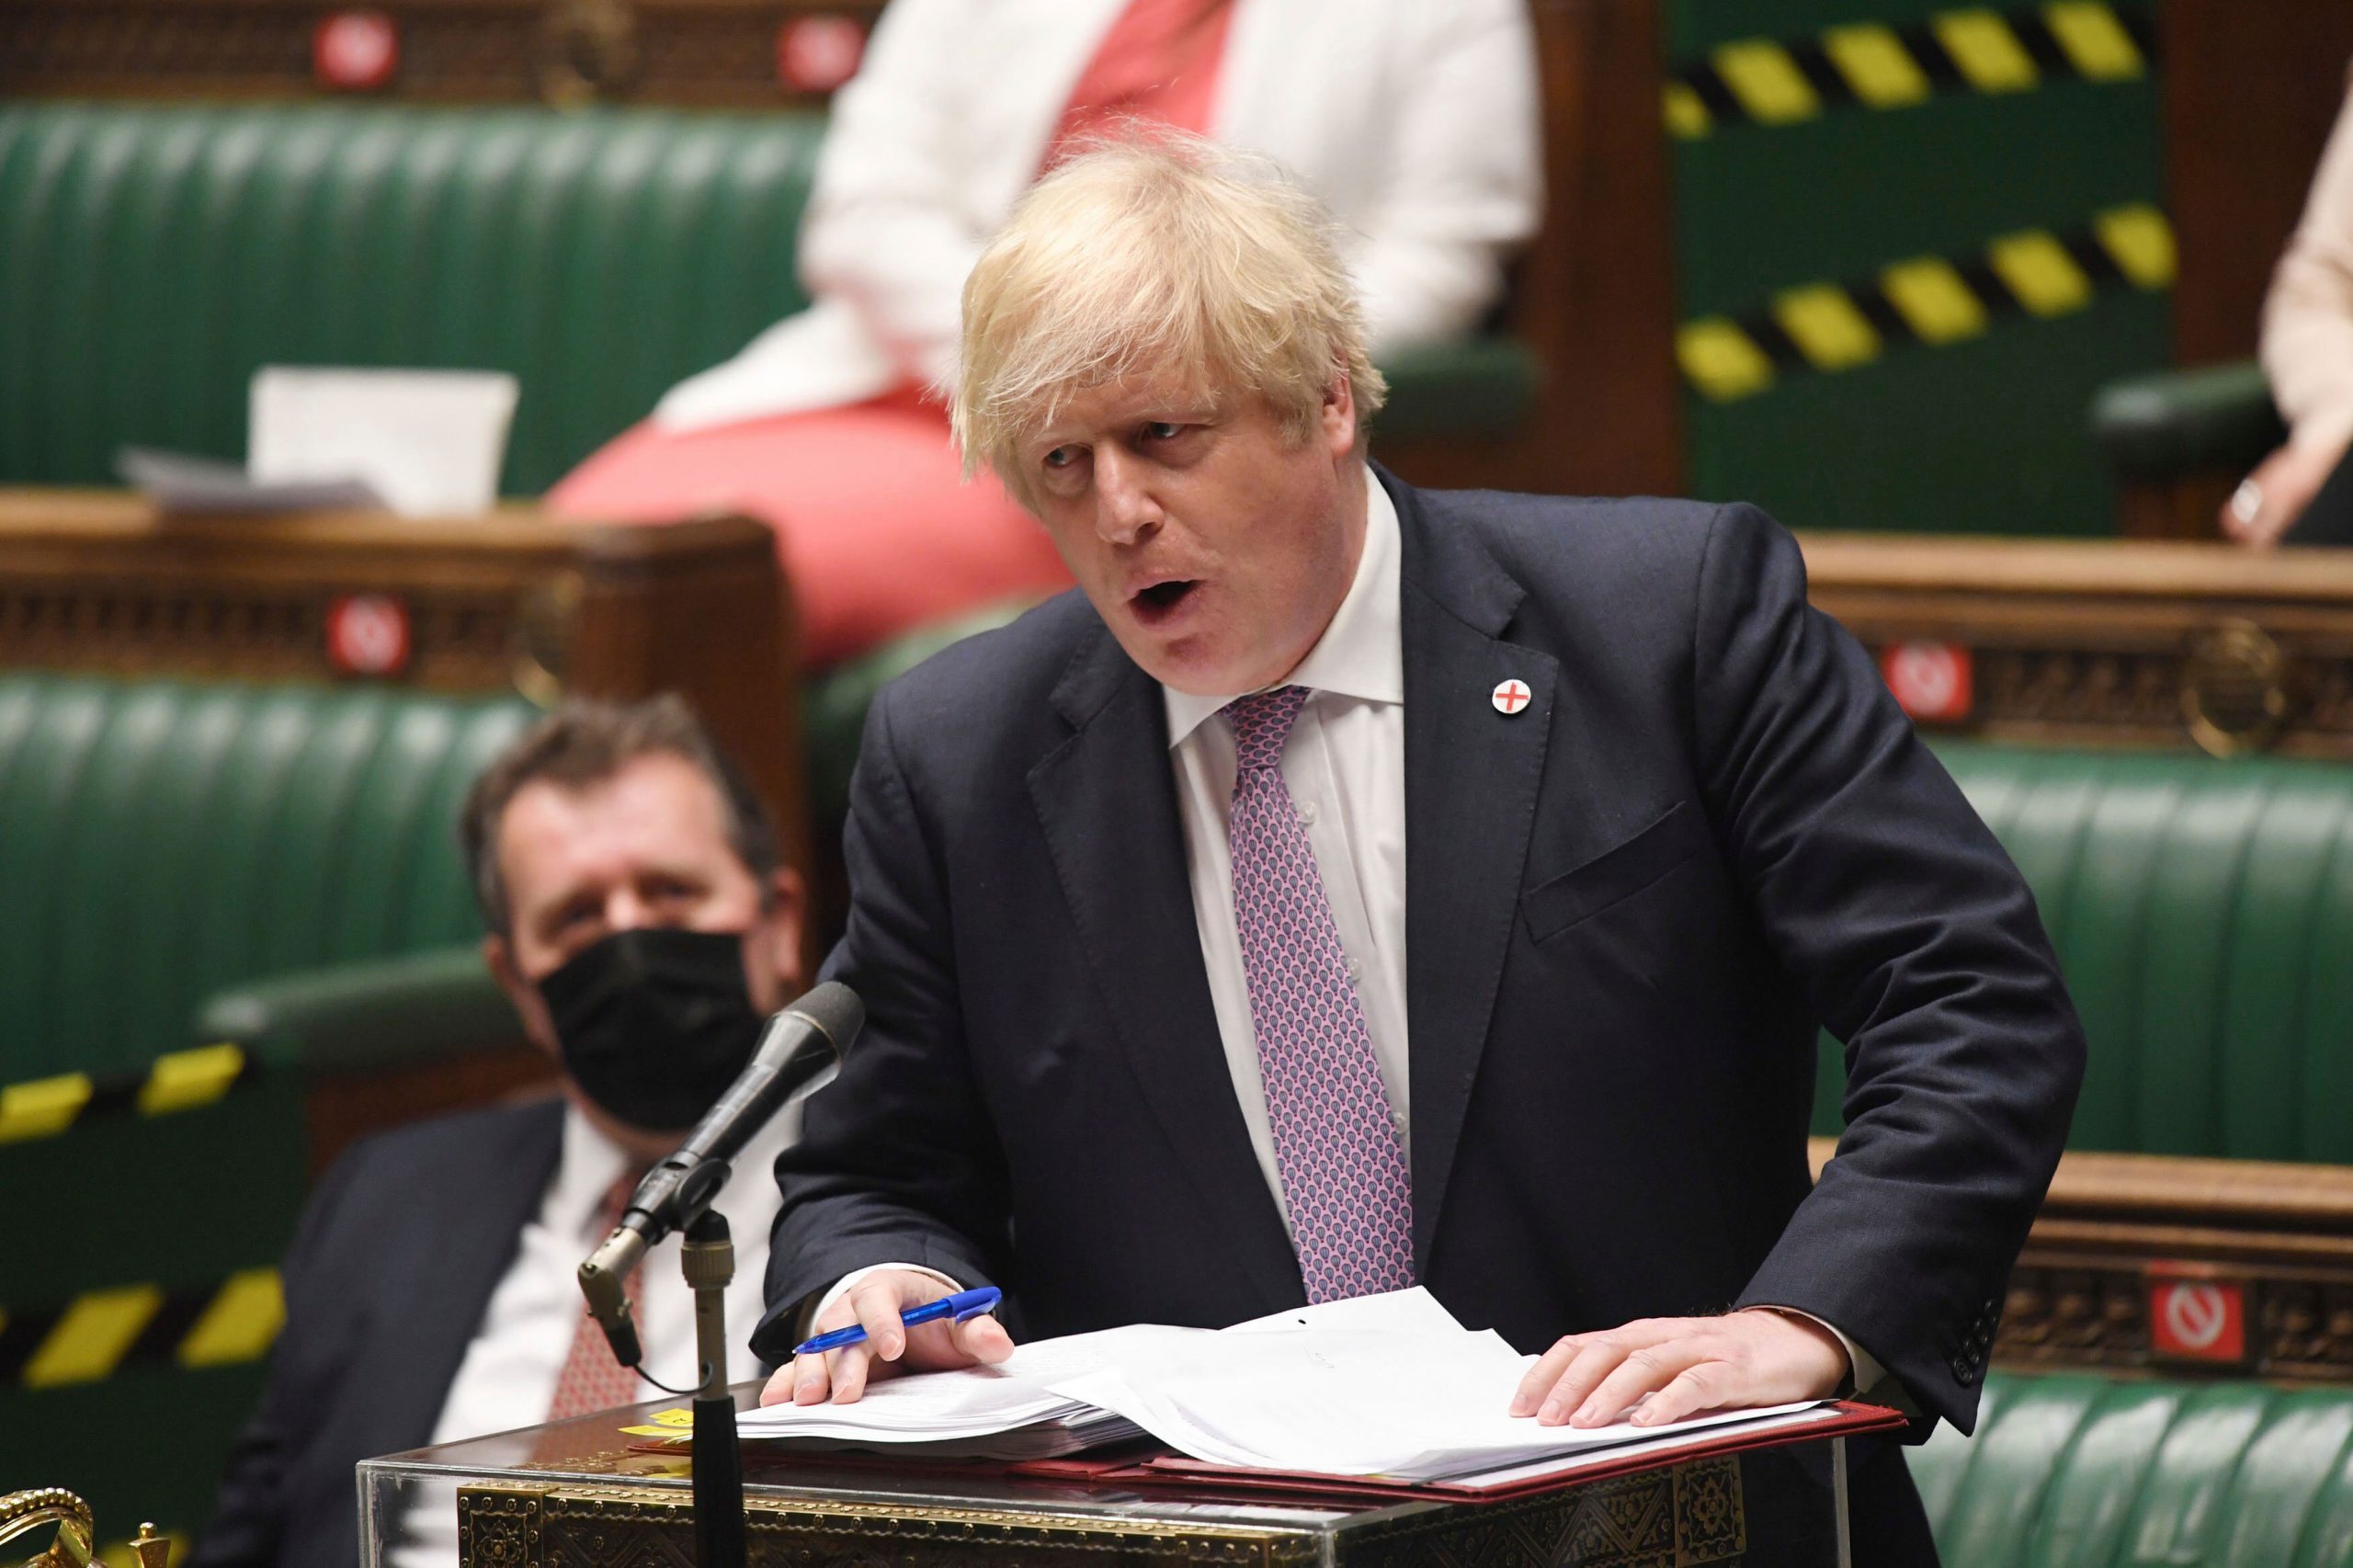 Boris Johnson to self-isolate after UK Health Minister tests COVID positive